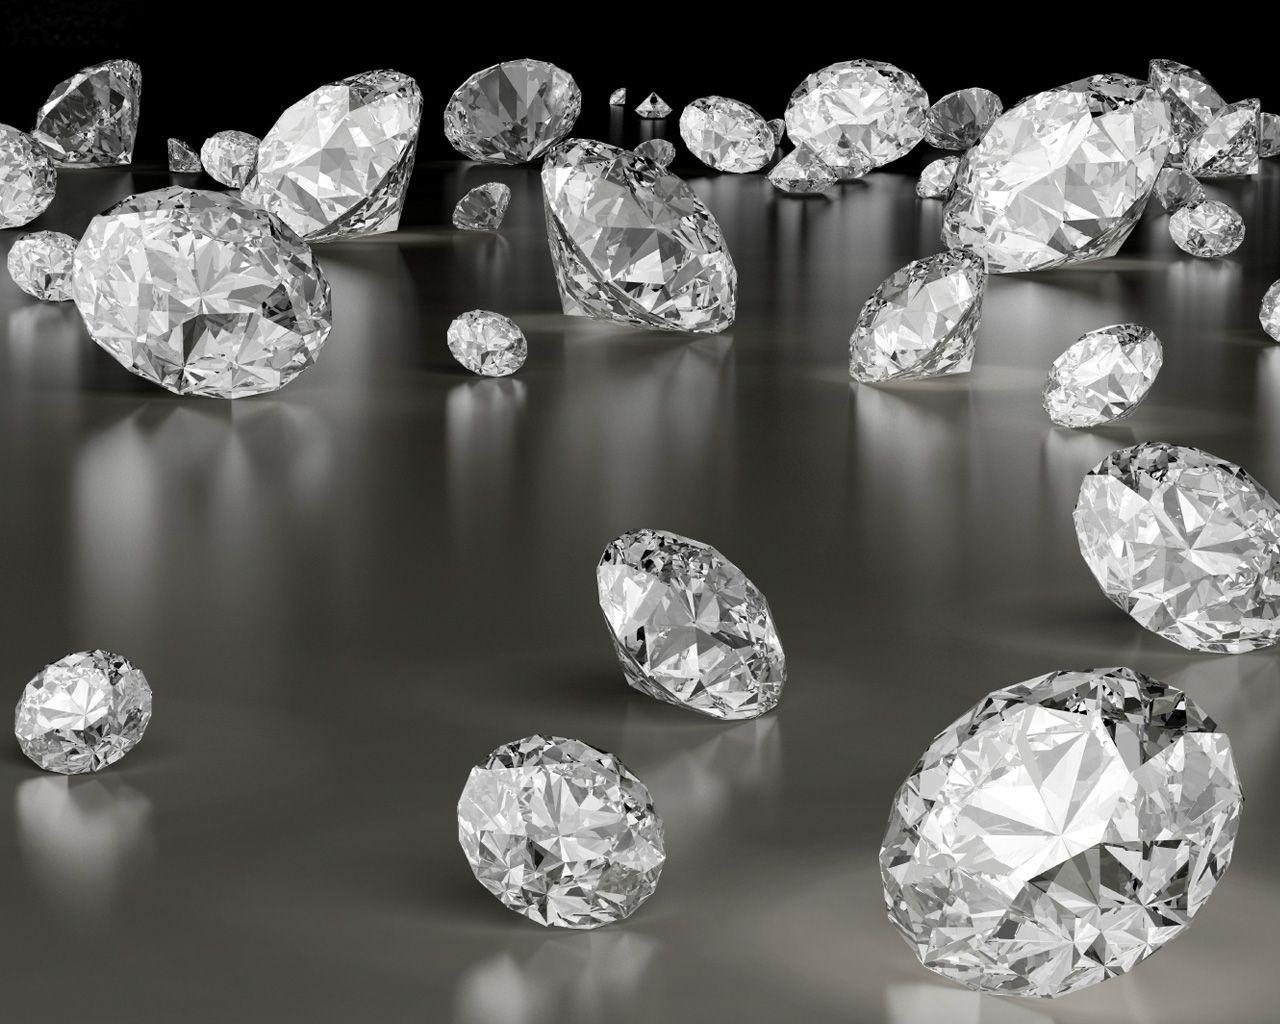 Diamond Free PPT Background for your PowerPoint